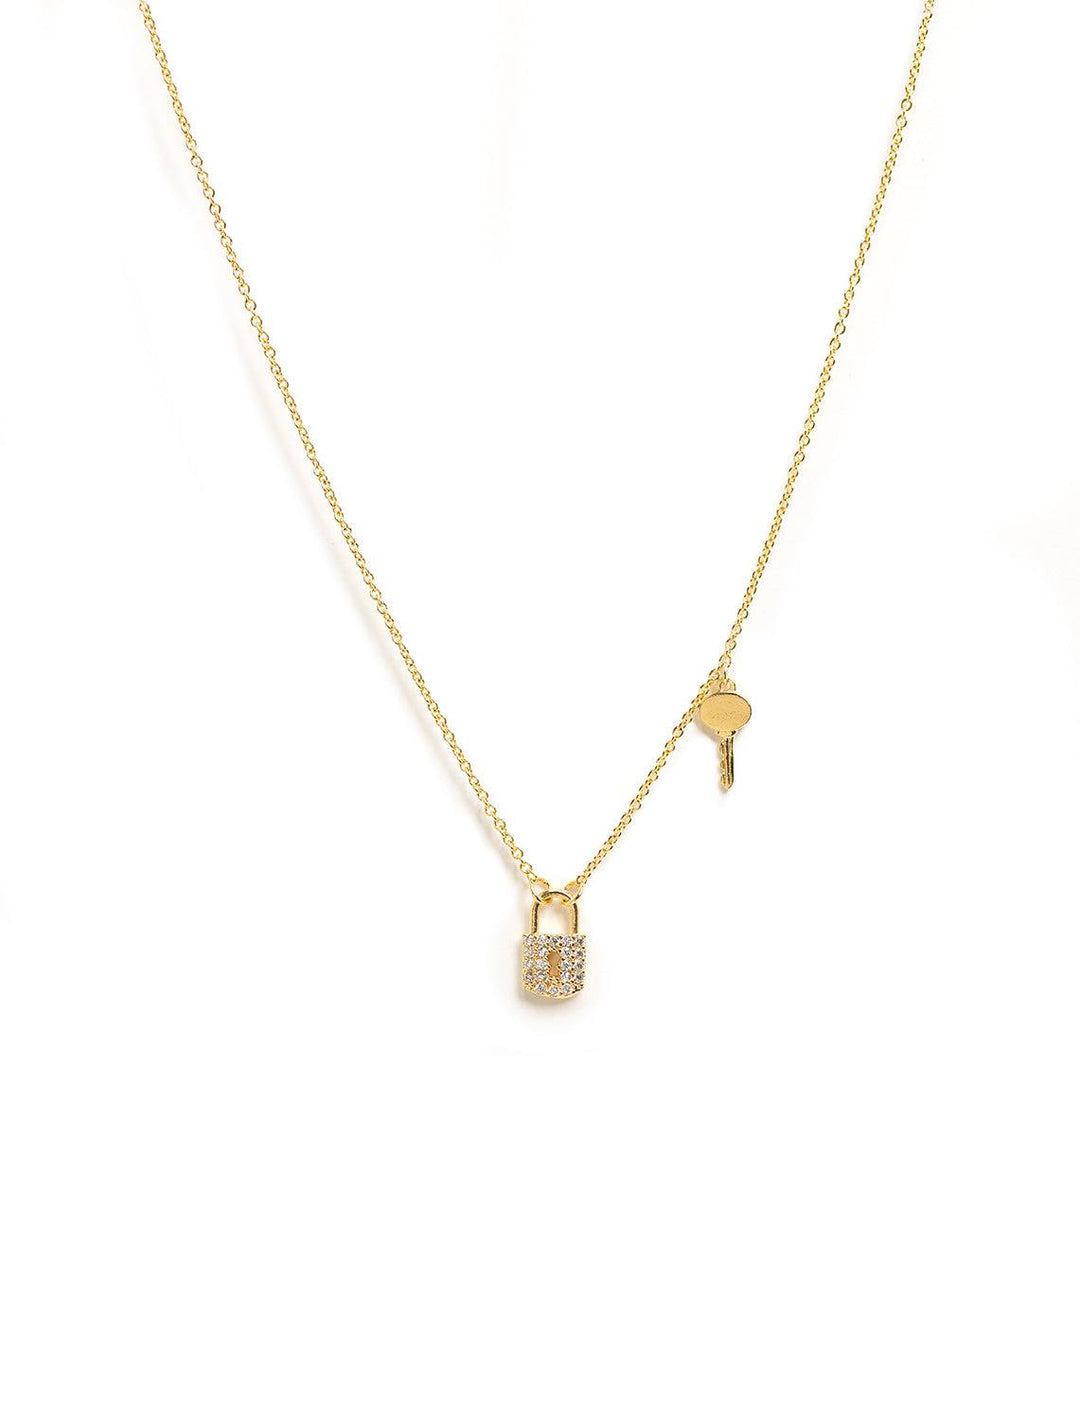 Tai jewelry's pave cubic zirconia lock and key necklace in gold.